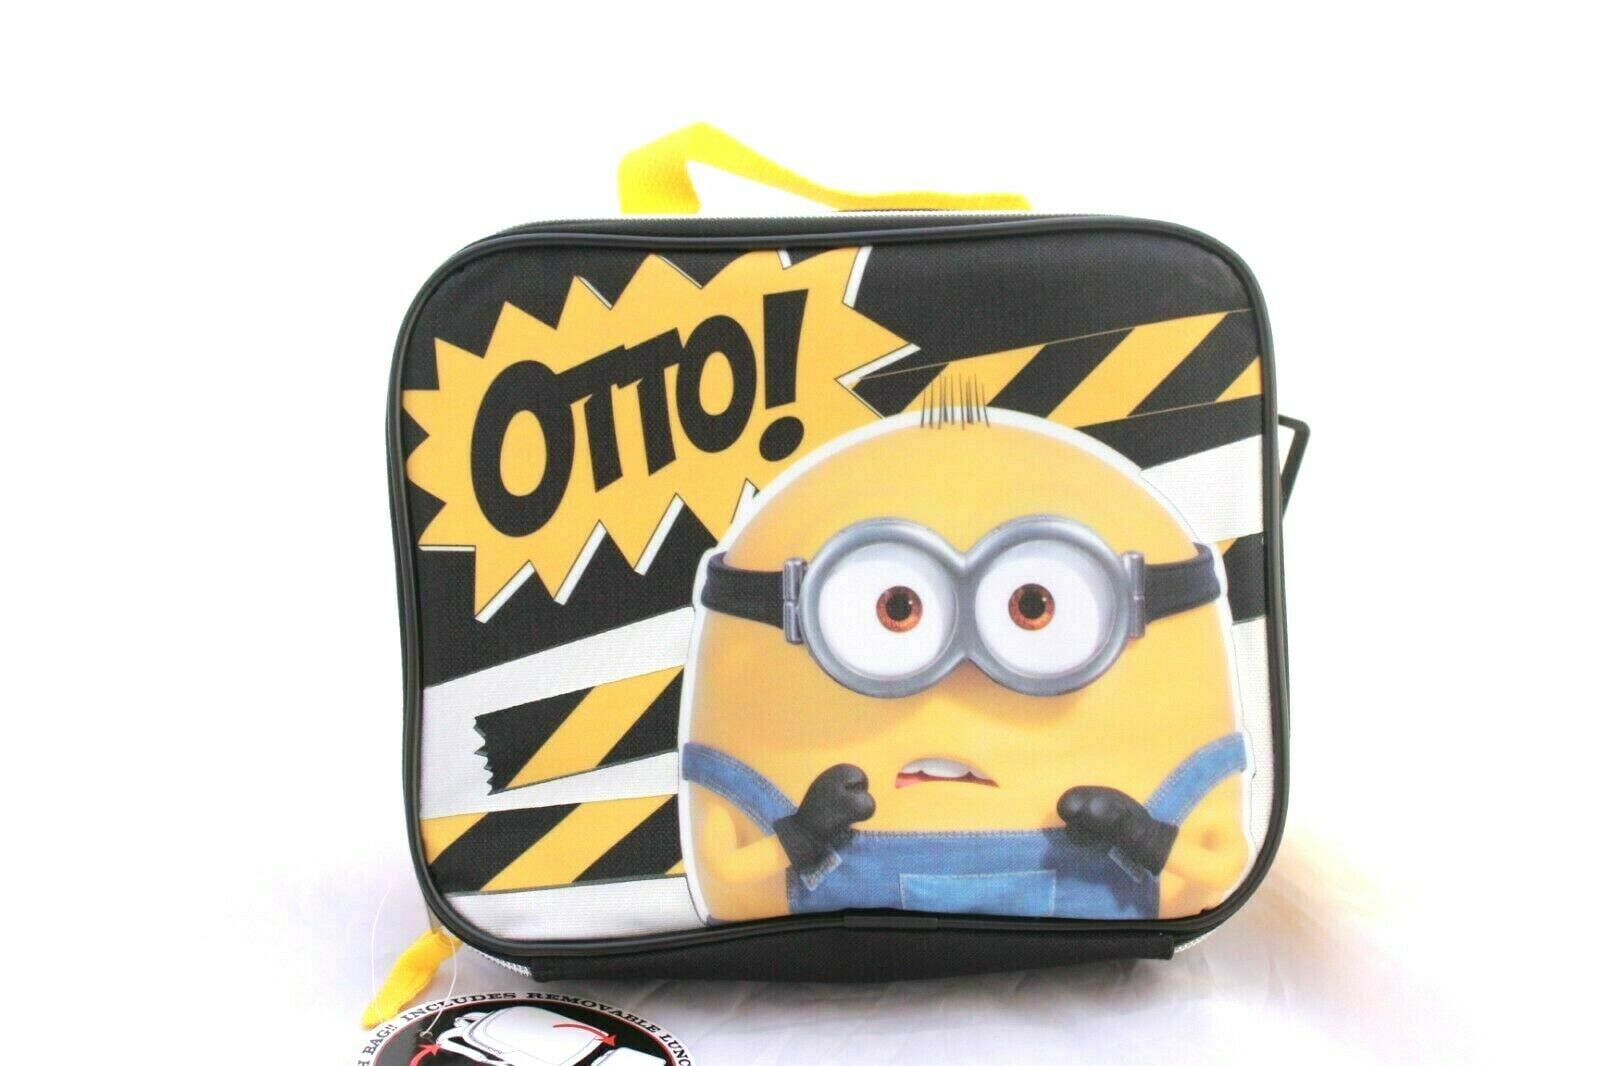 Despicable Me Minions School Travel Backpack And Lunch Box For Kids 2-Piece  Set Multicoloured